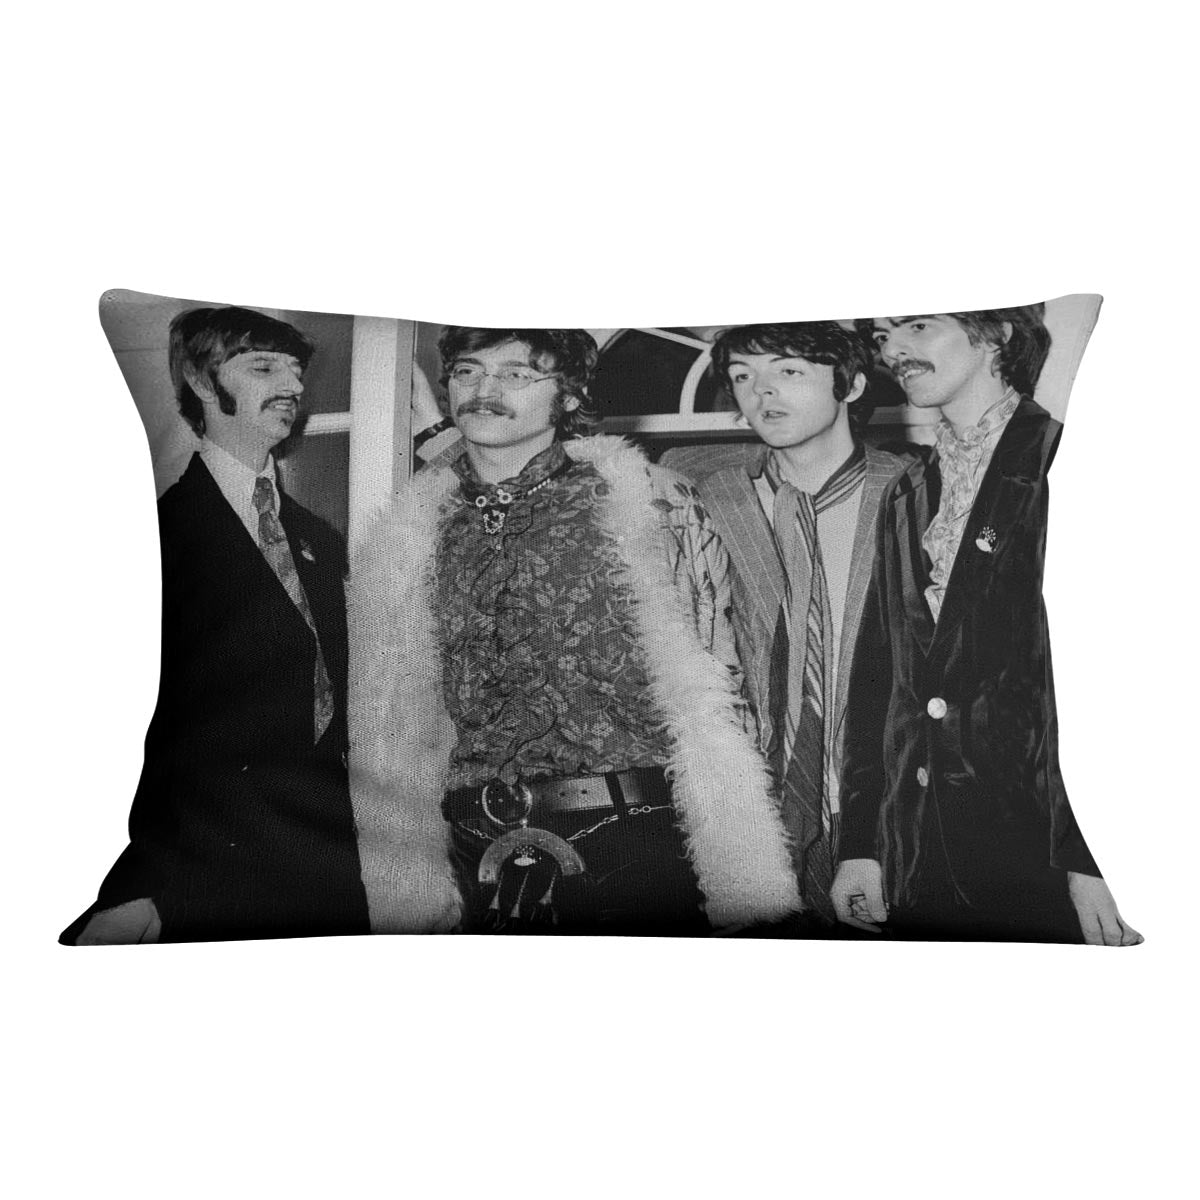 The Beatles in 1967 Cushion